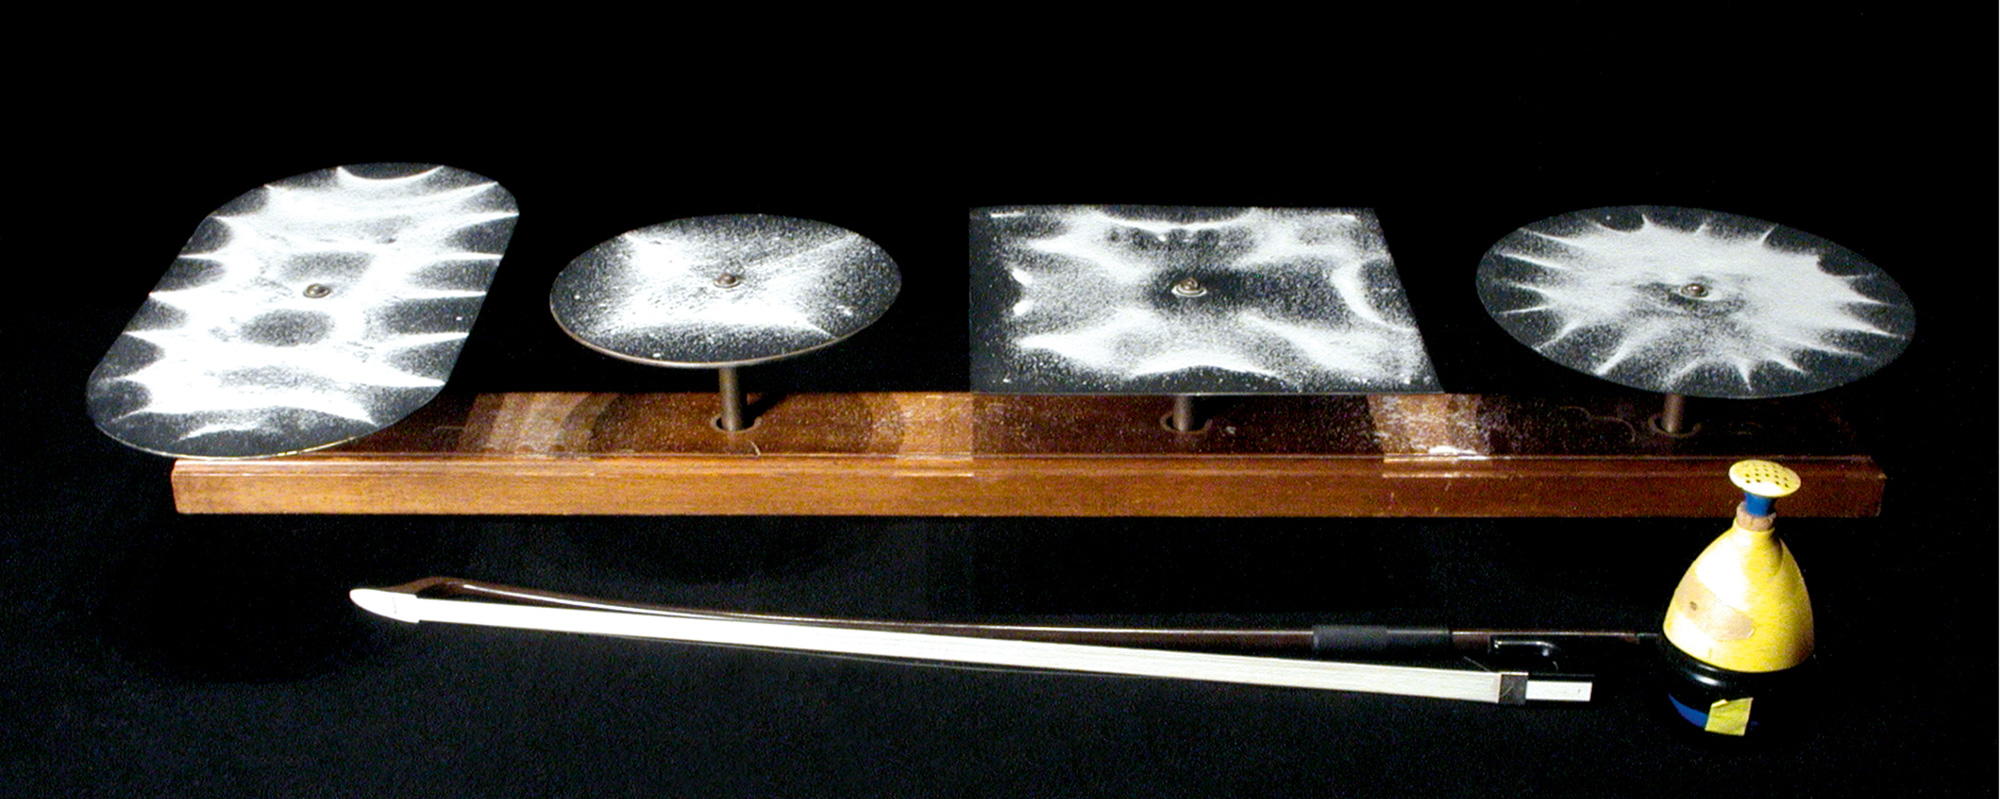 Chladni plates showing different patterns of dispersion caused by their various shapes. Courtesy Harvard Natural Sciences Lecture Demonstrations.